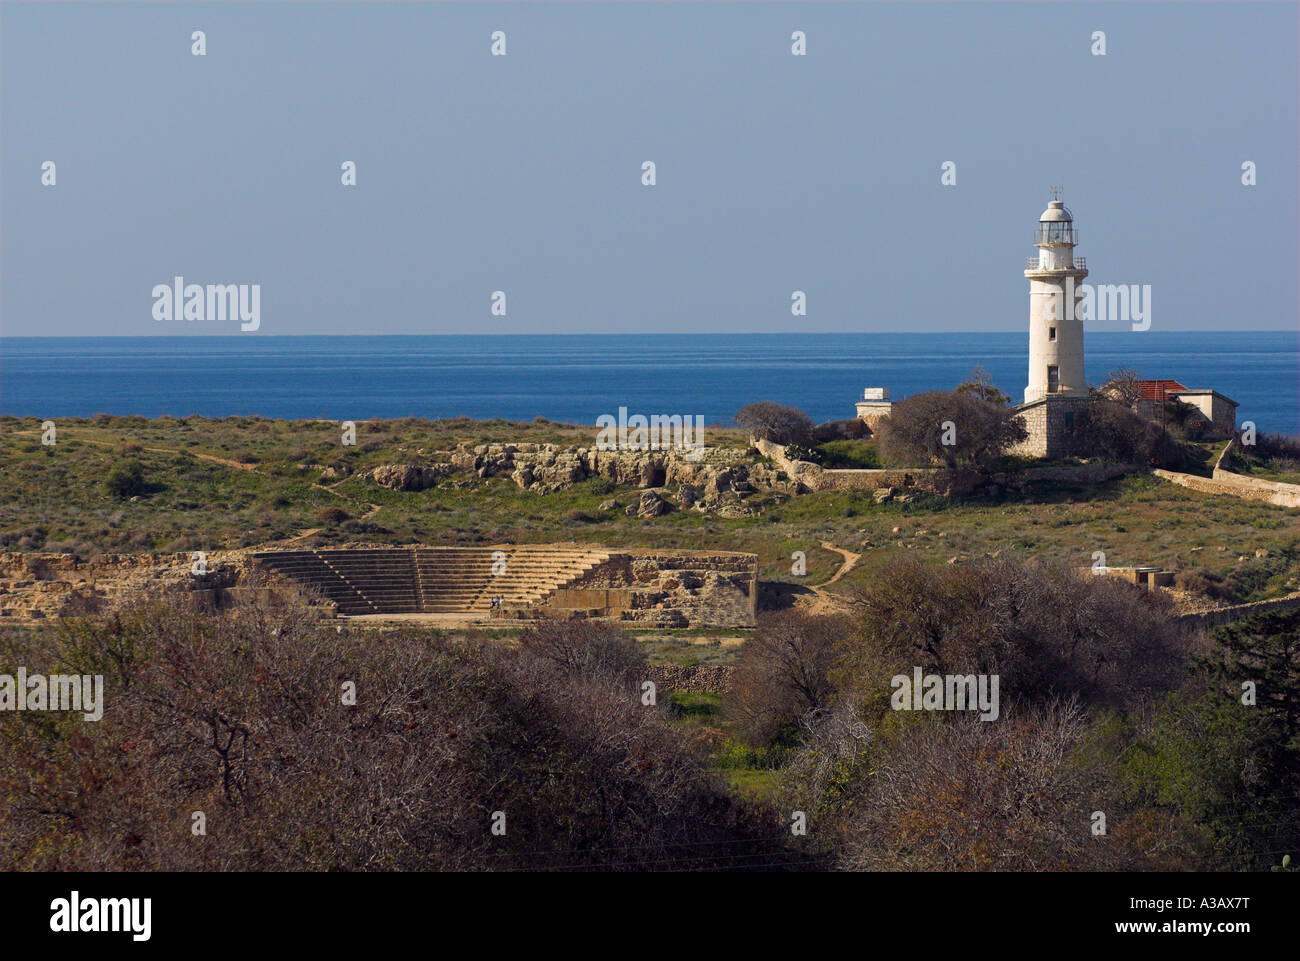 Cyprus lighthouse and Pafos 2nd century Odeon. Stock Photo